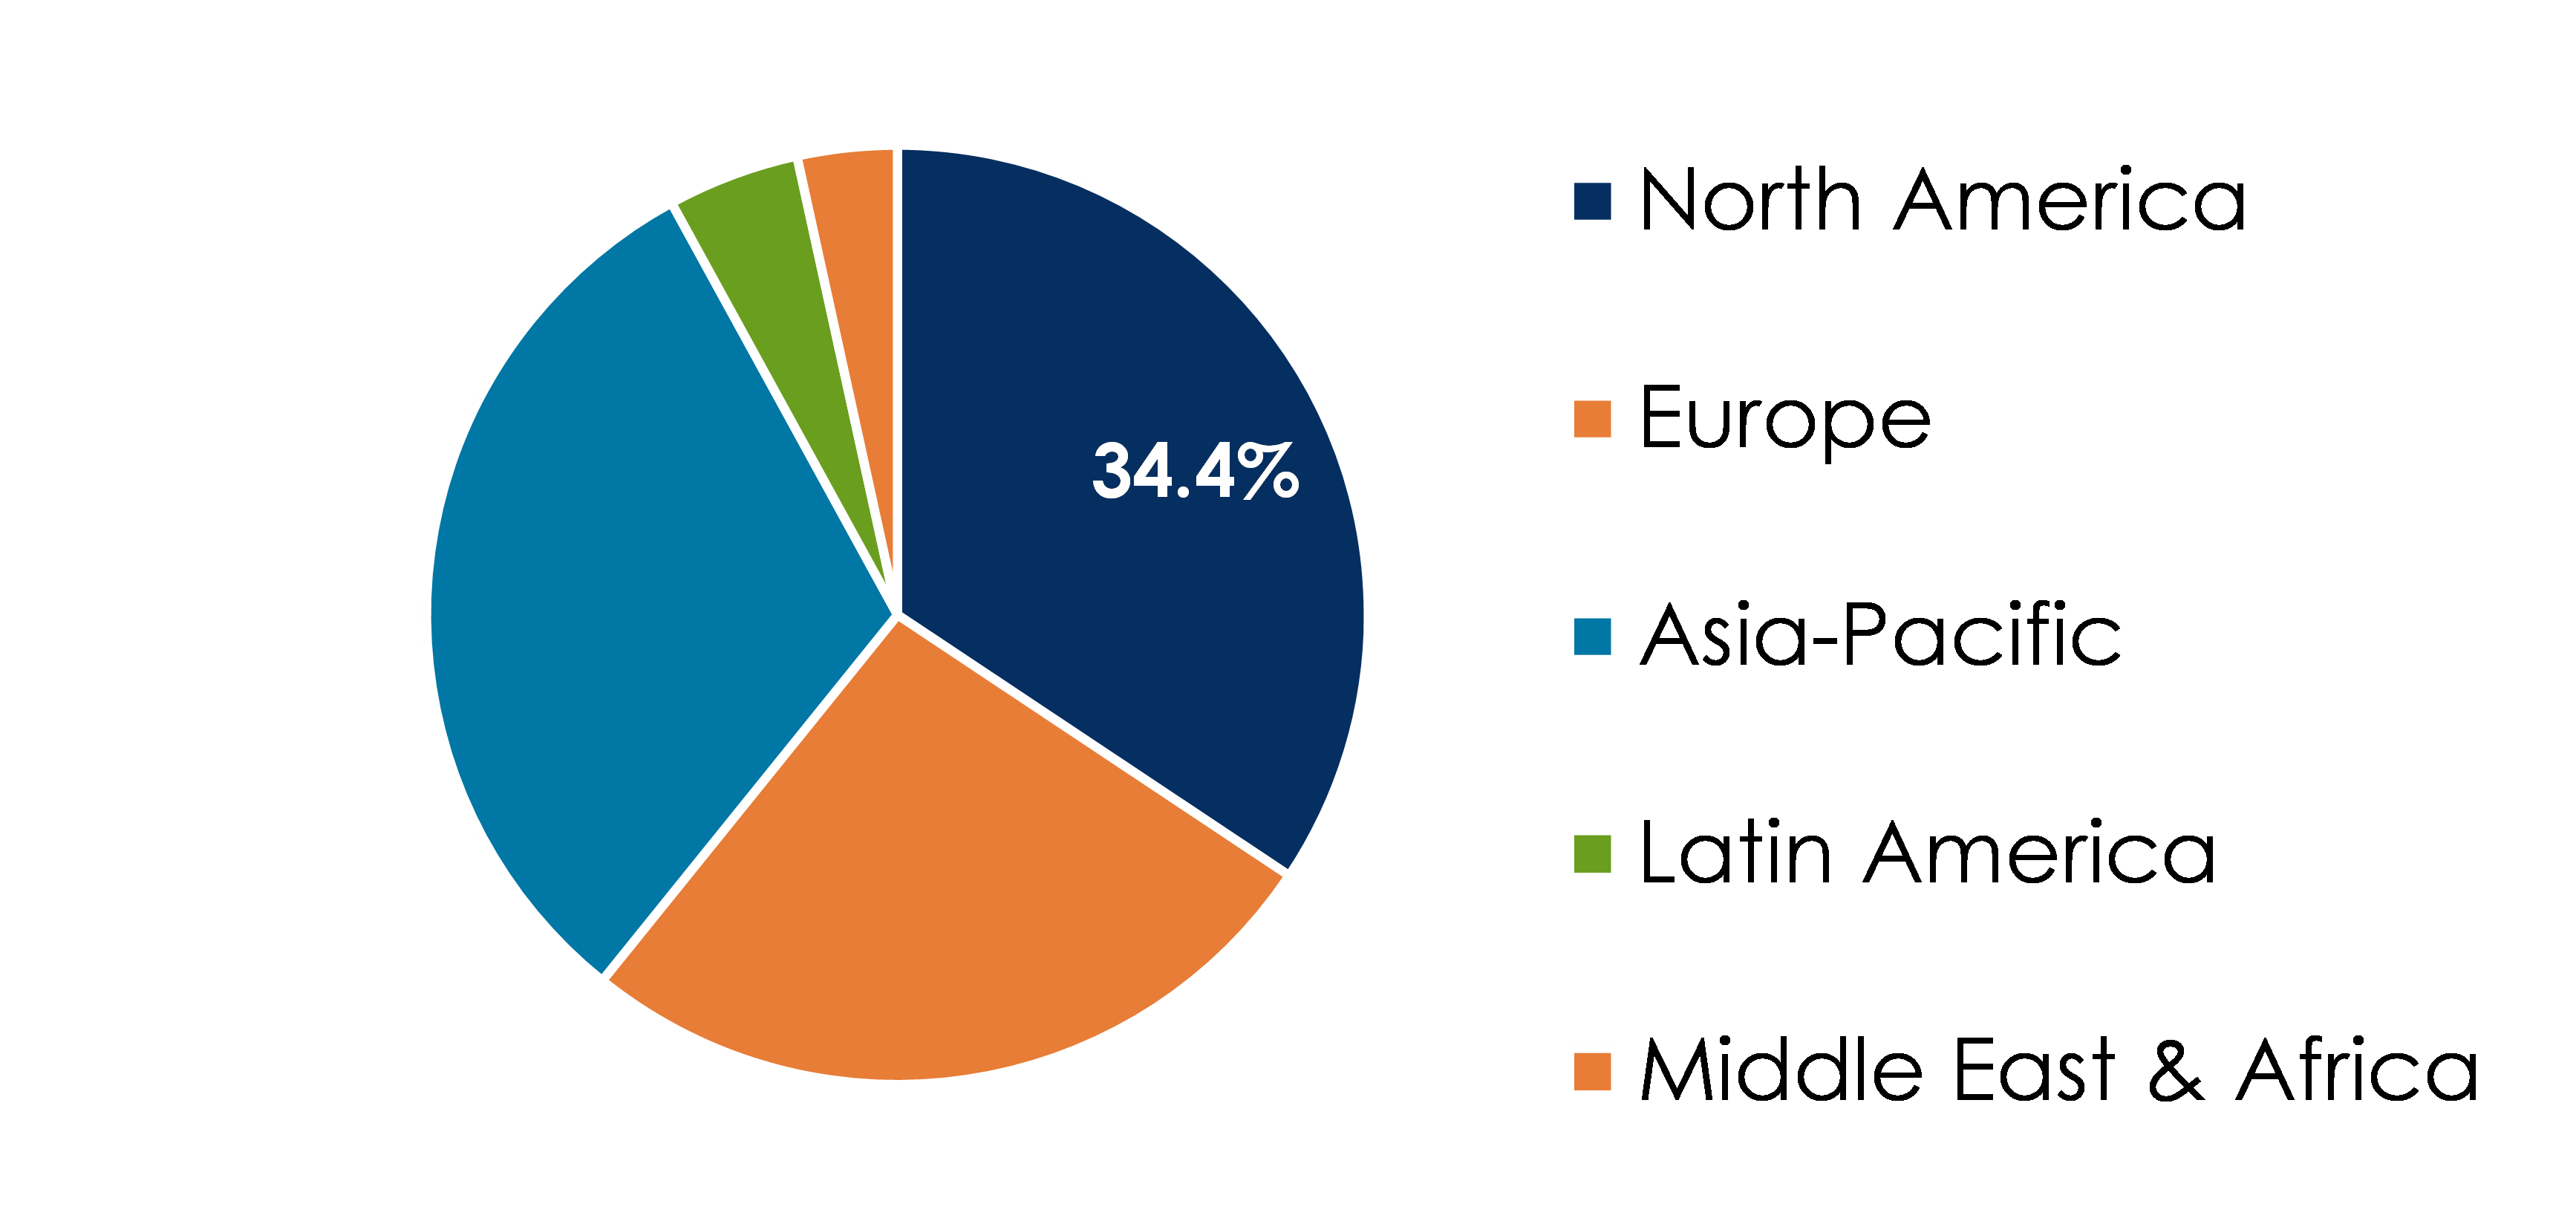 EDGE SECURITY MARKET SHARE, BY REGION, 2023